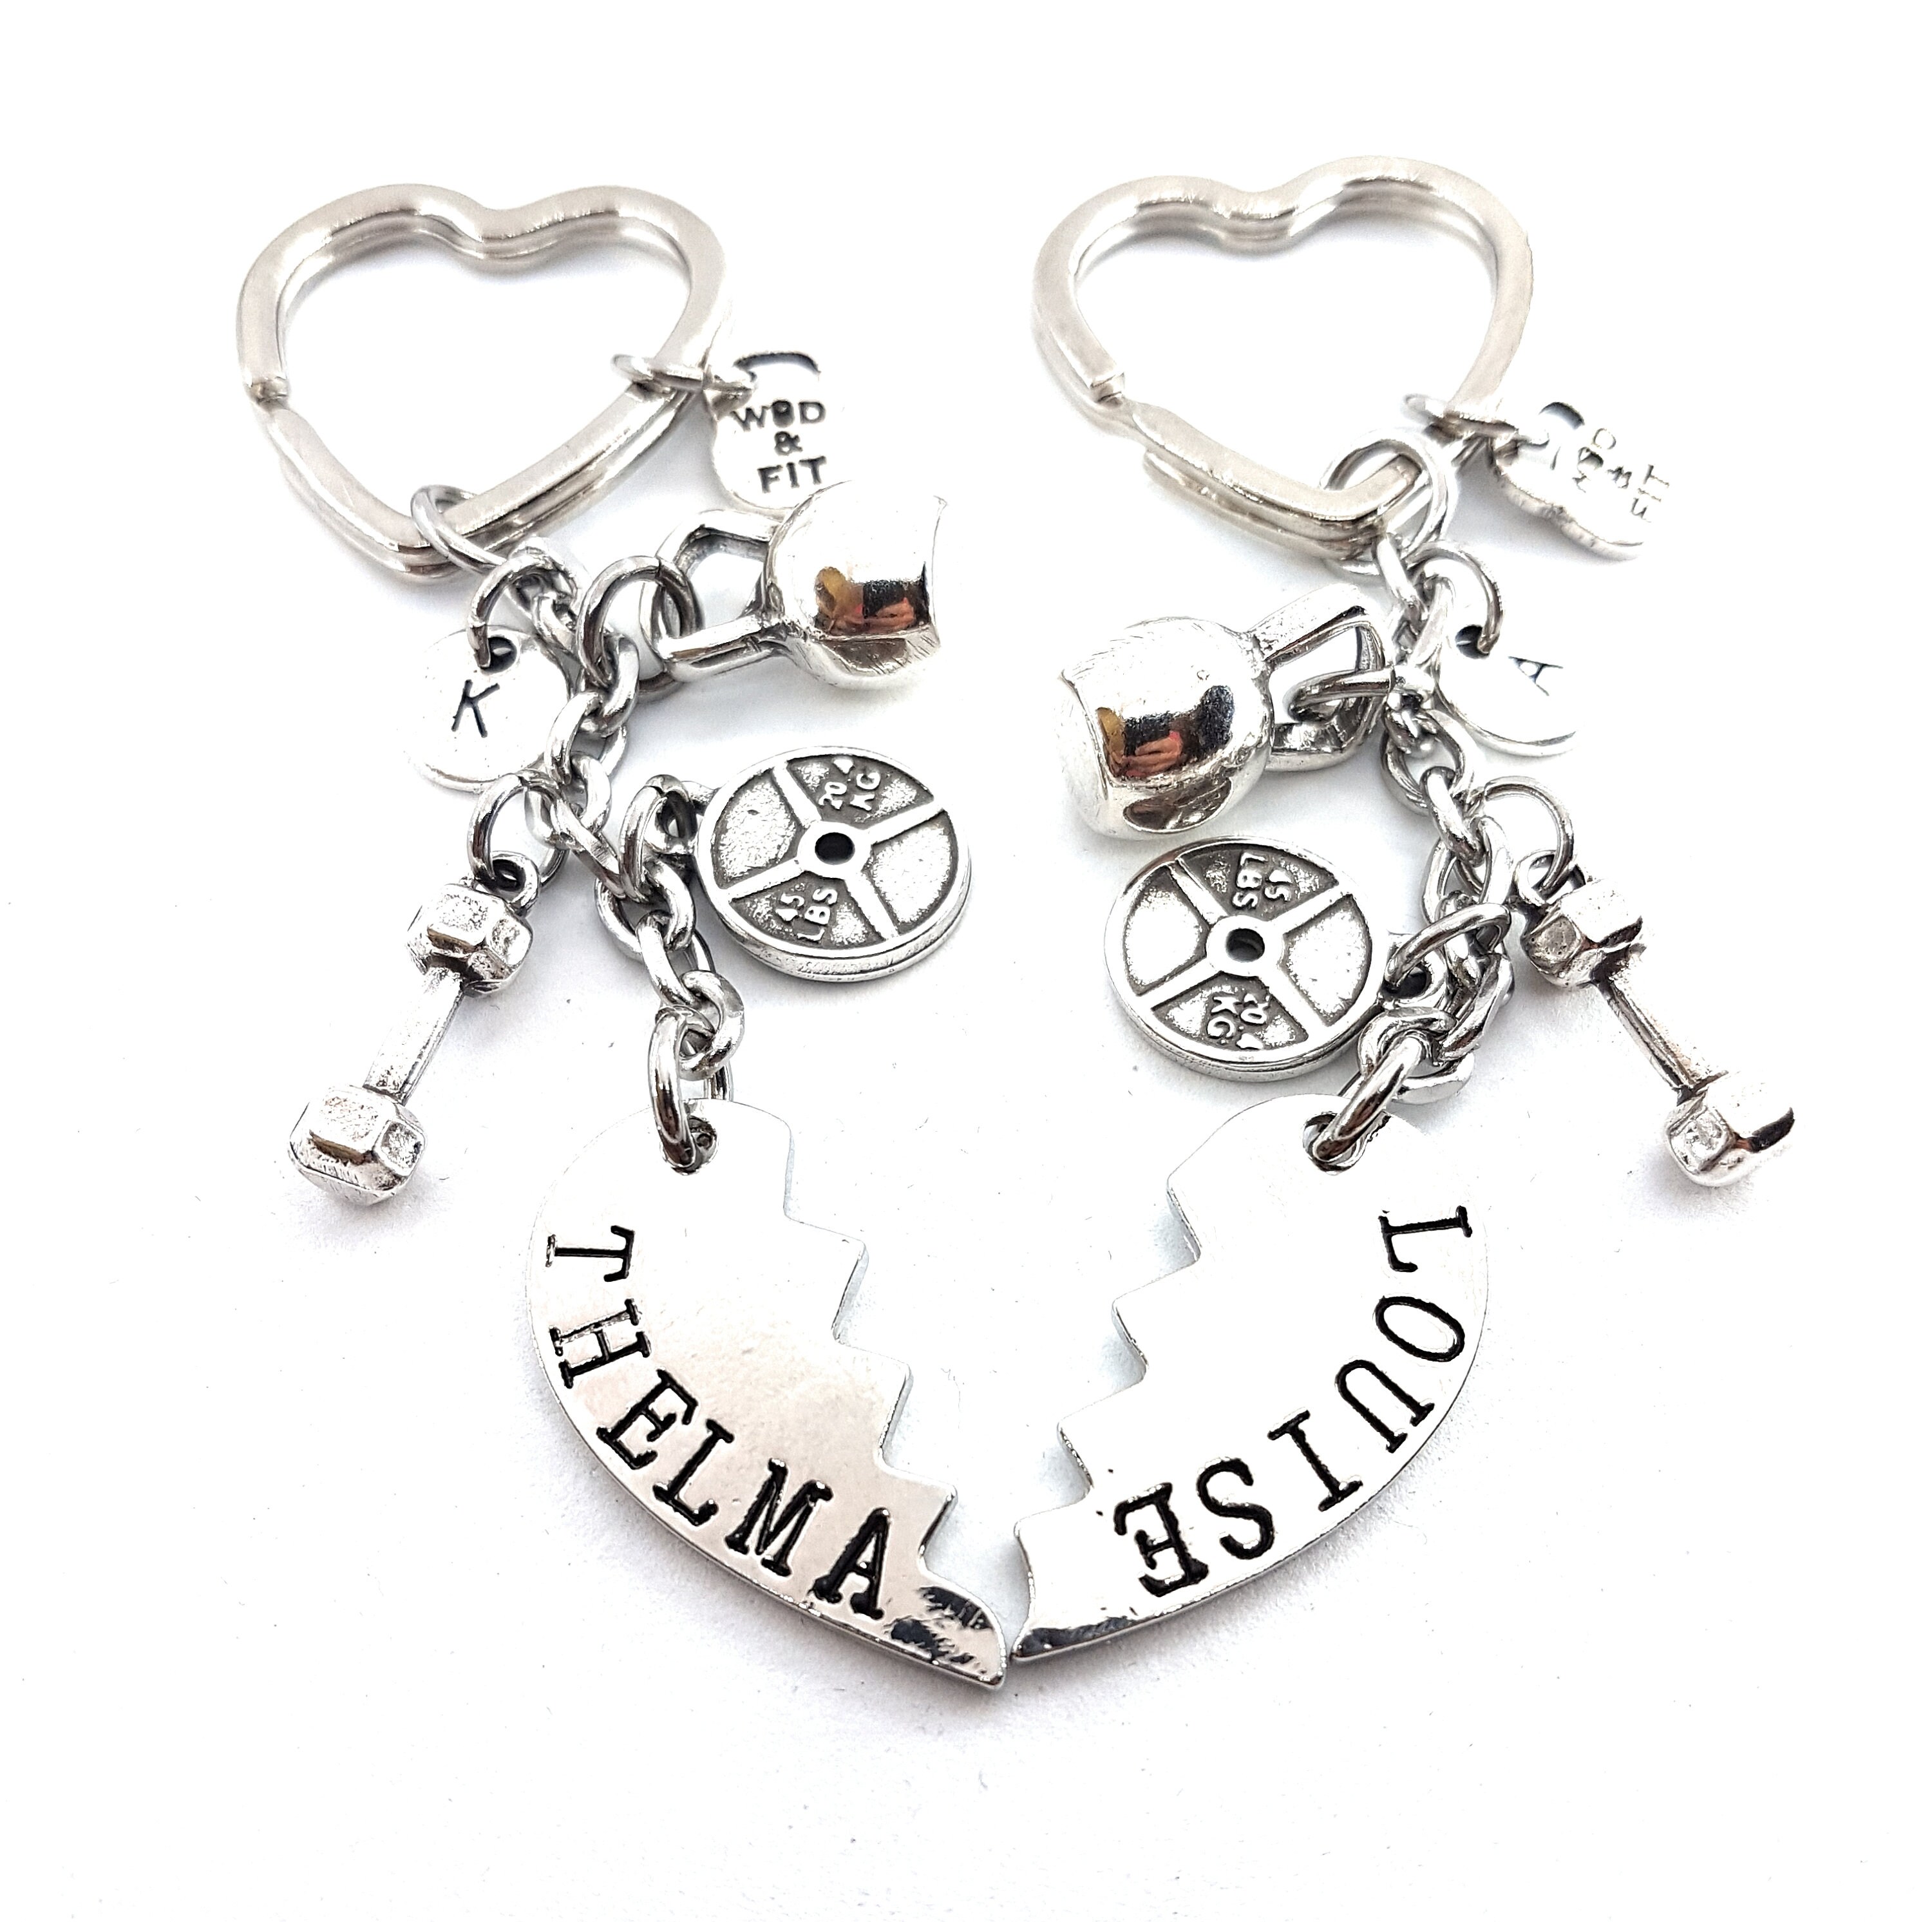 Couples Keychain Thelma and Louise - BFF Gifts · Sisters Gift · Mom gift ·  Partners Gift · Couple Gif · Anniversary ift · Gym Gift·Wod & Fit